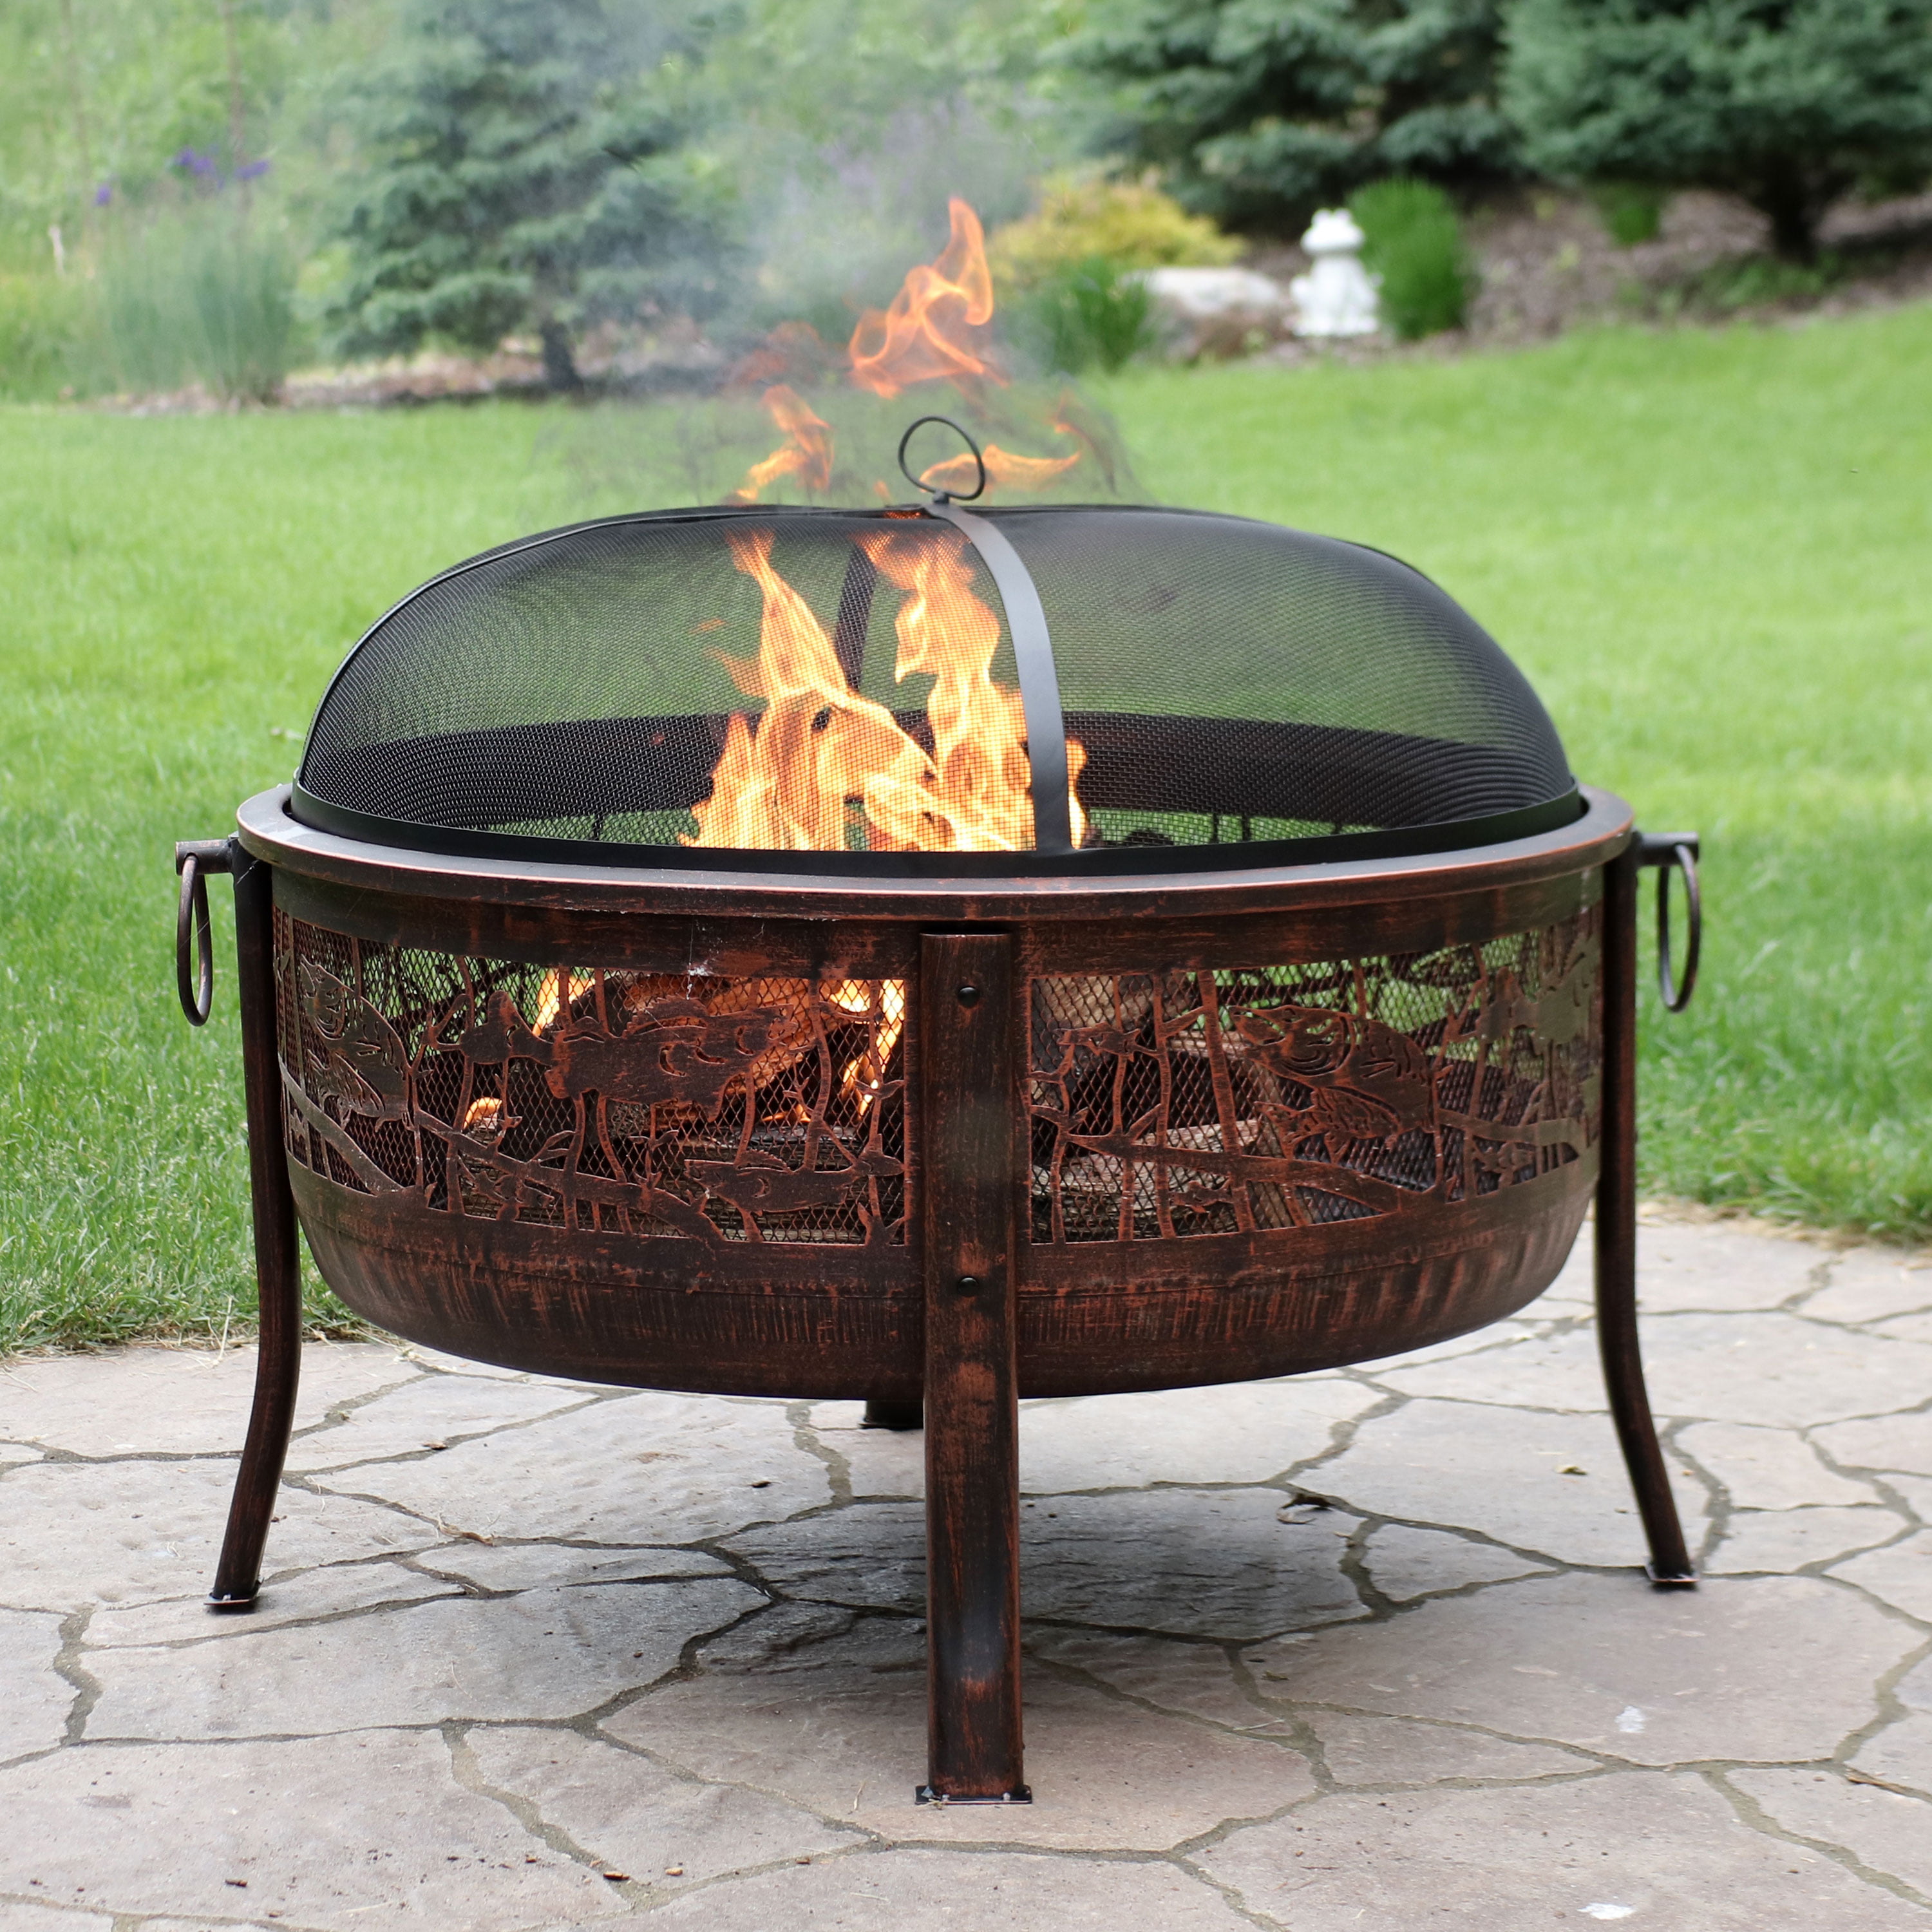 Sunnydaze 30 Fire Pit  Steel with Northwoods Fishing 